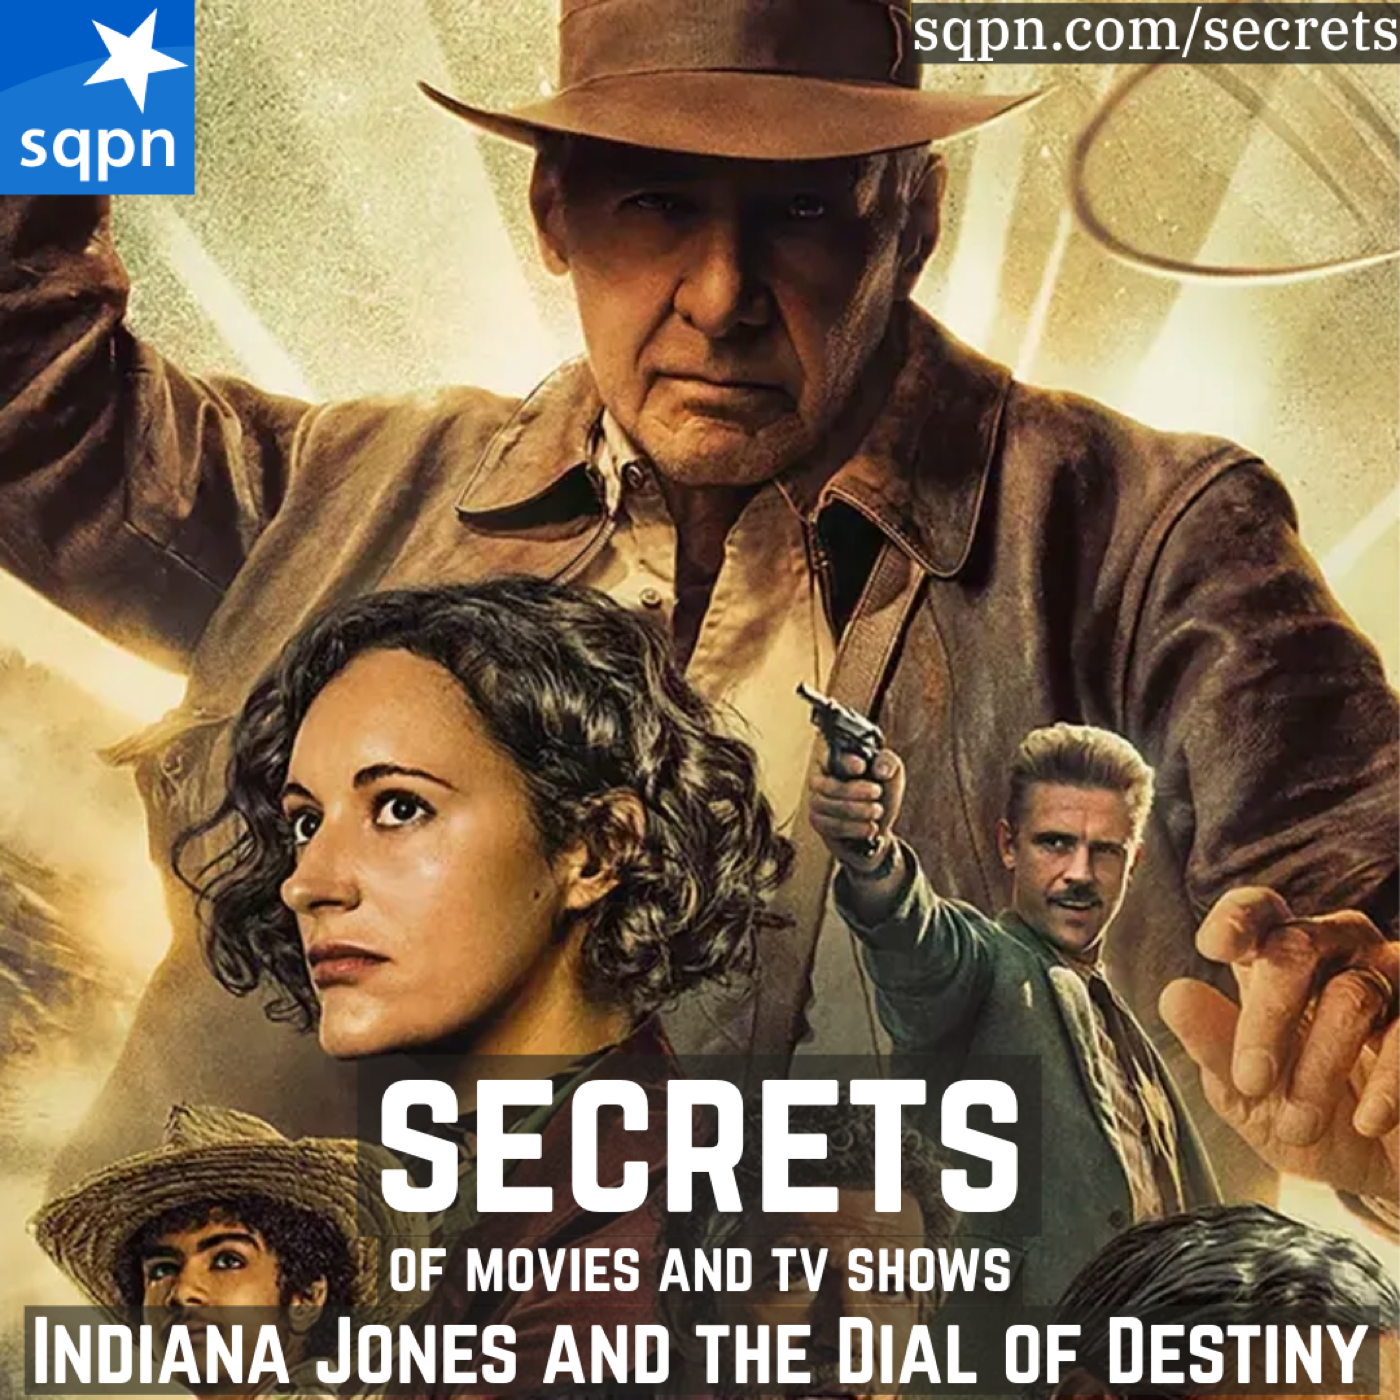 The Secrets of Indiana Jones and the Dial of Destiny